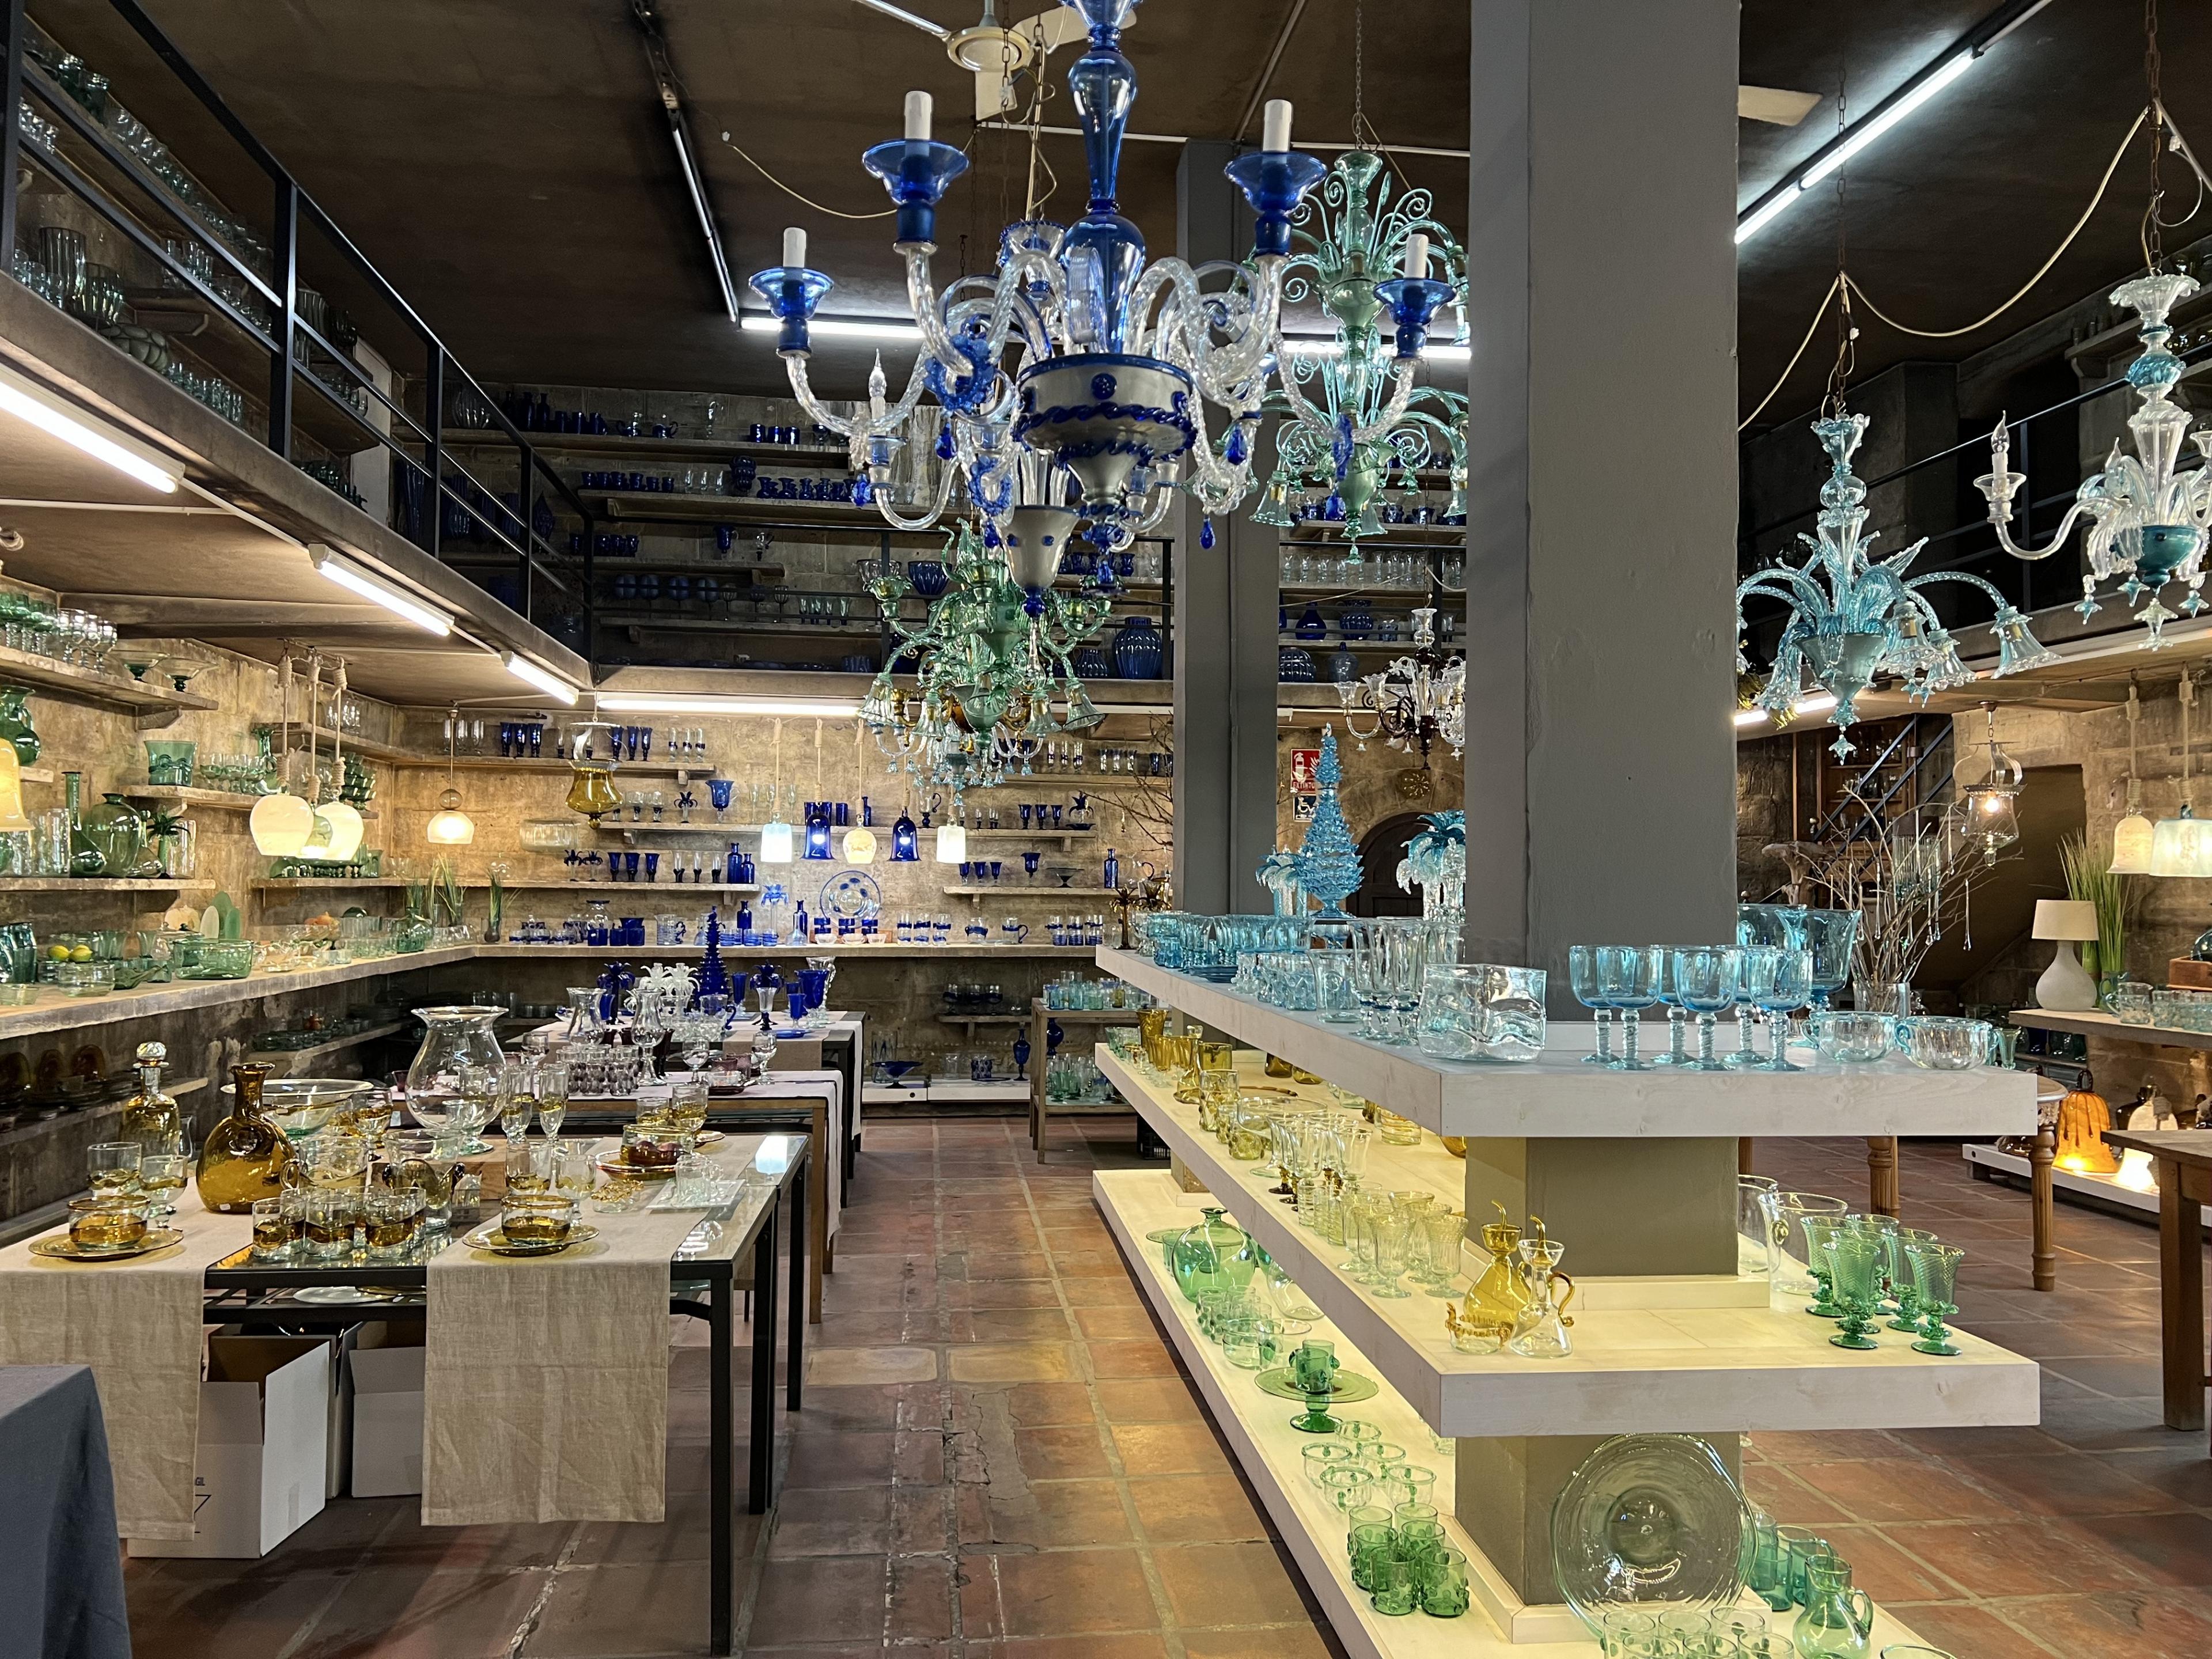 Store full of shelves and tables topped with glassware such as vases, wine glasses, platters, and glass chandeliers hanging above 